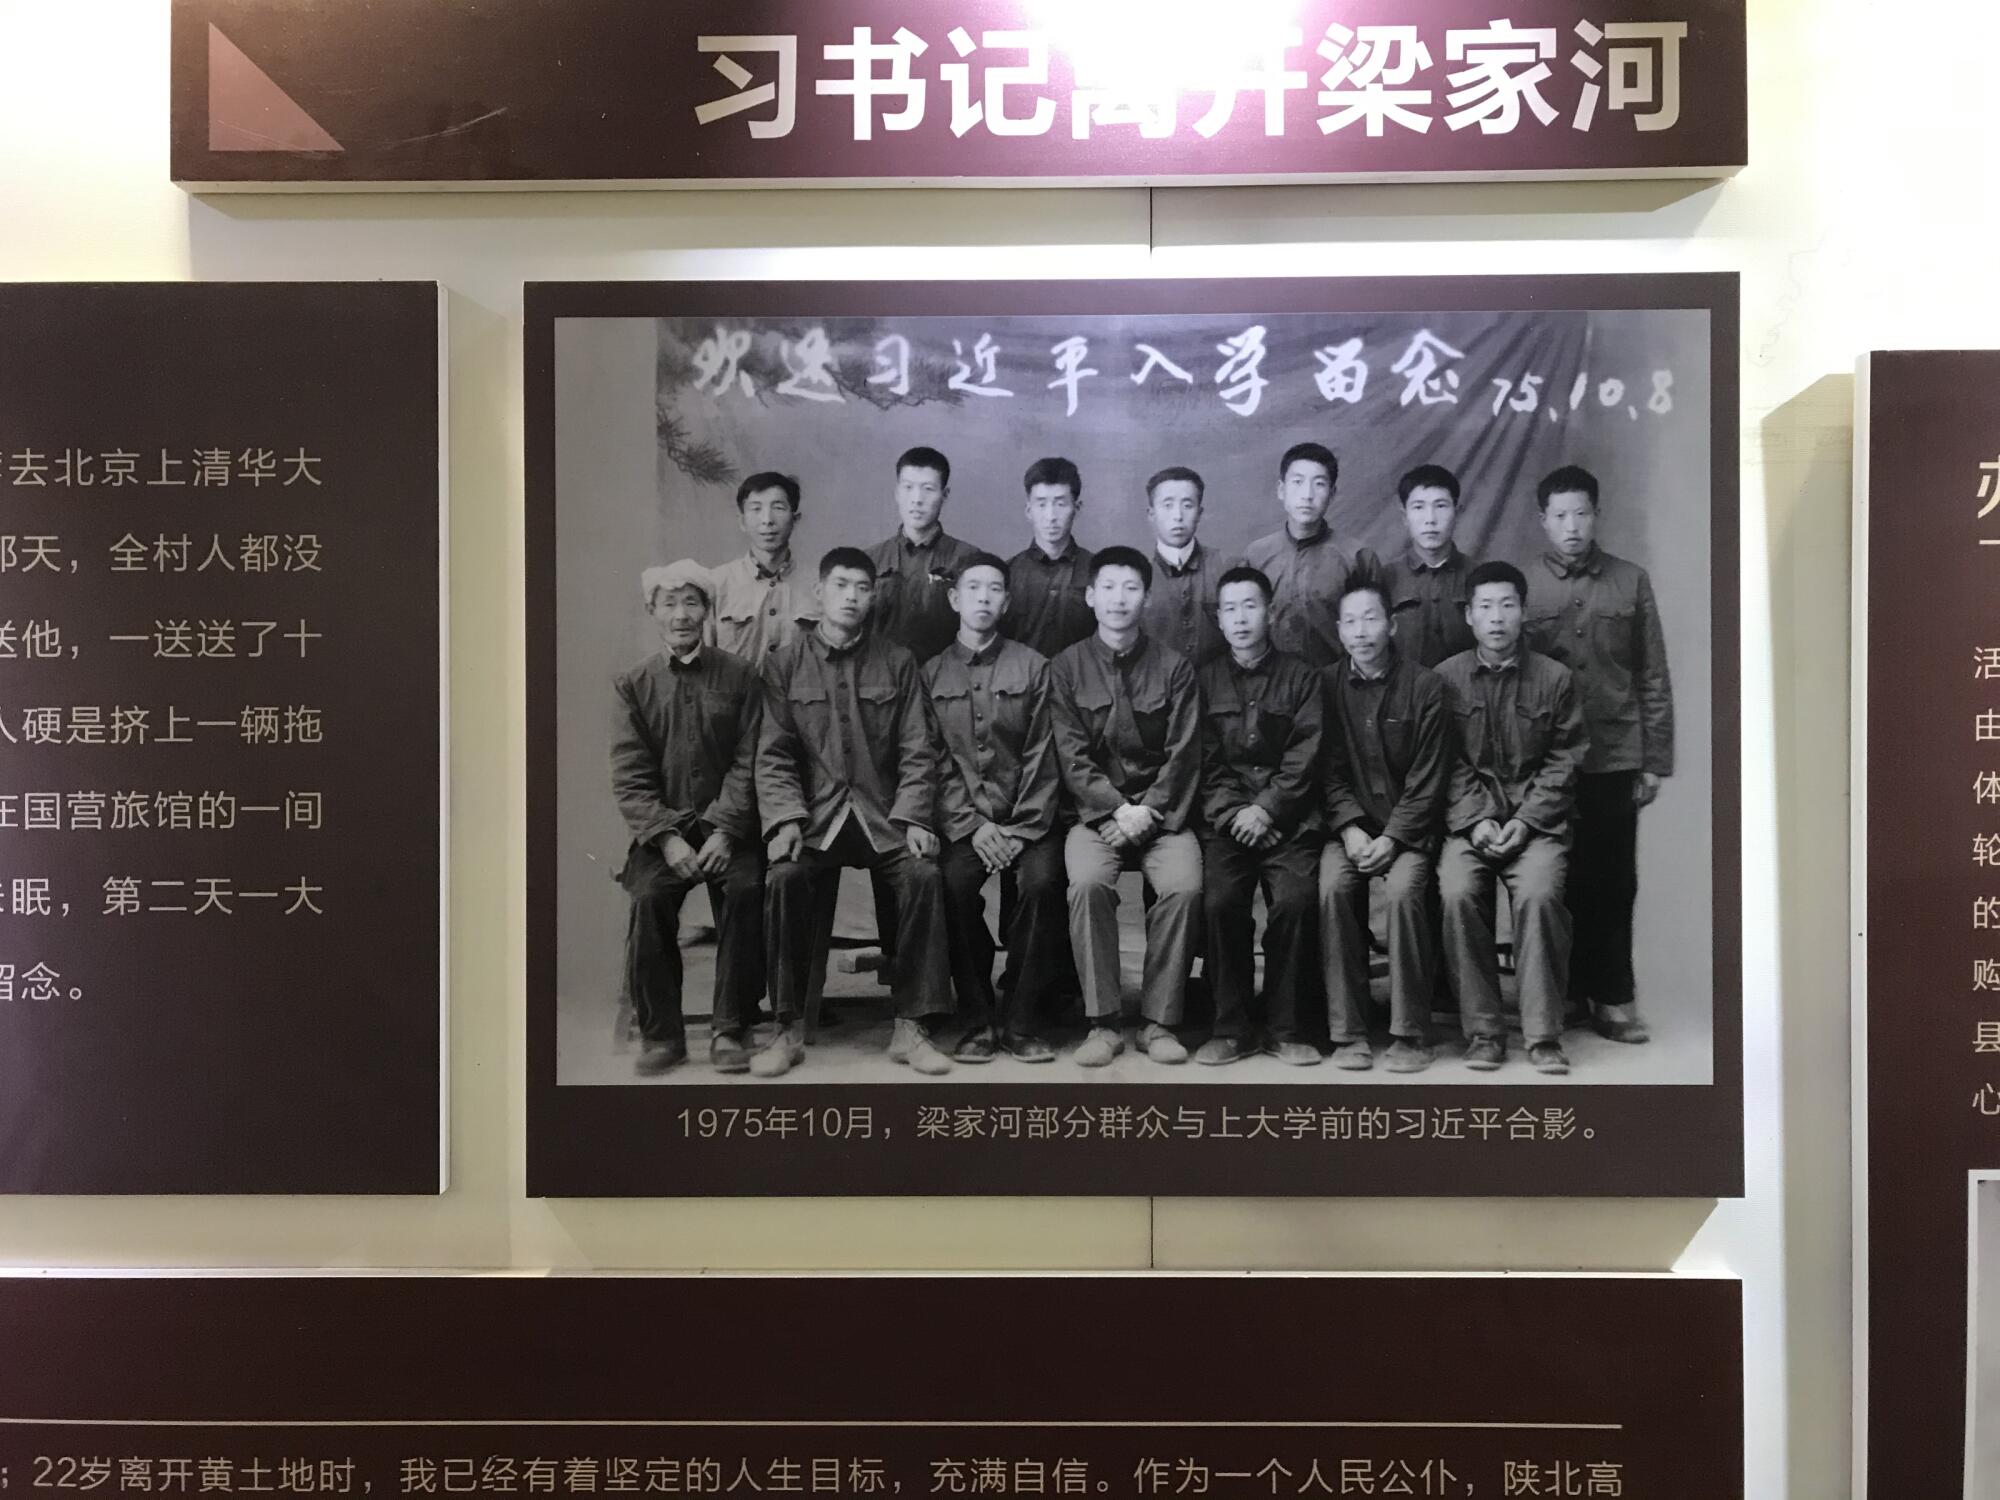 A photo shows a young Xi Jinping sitting in the center of the front row, surrounded by villagers.